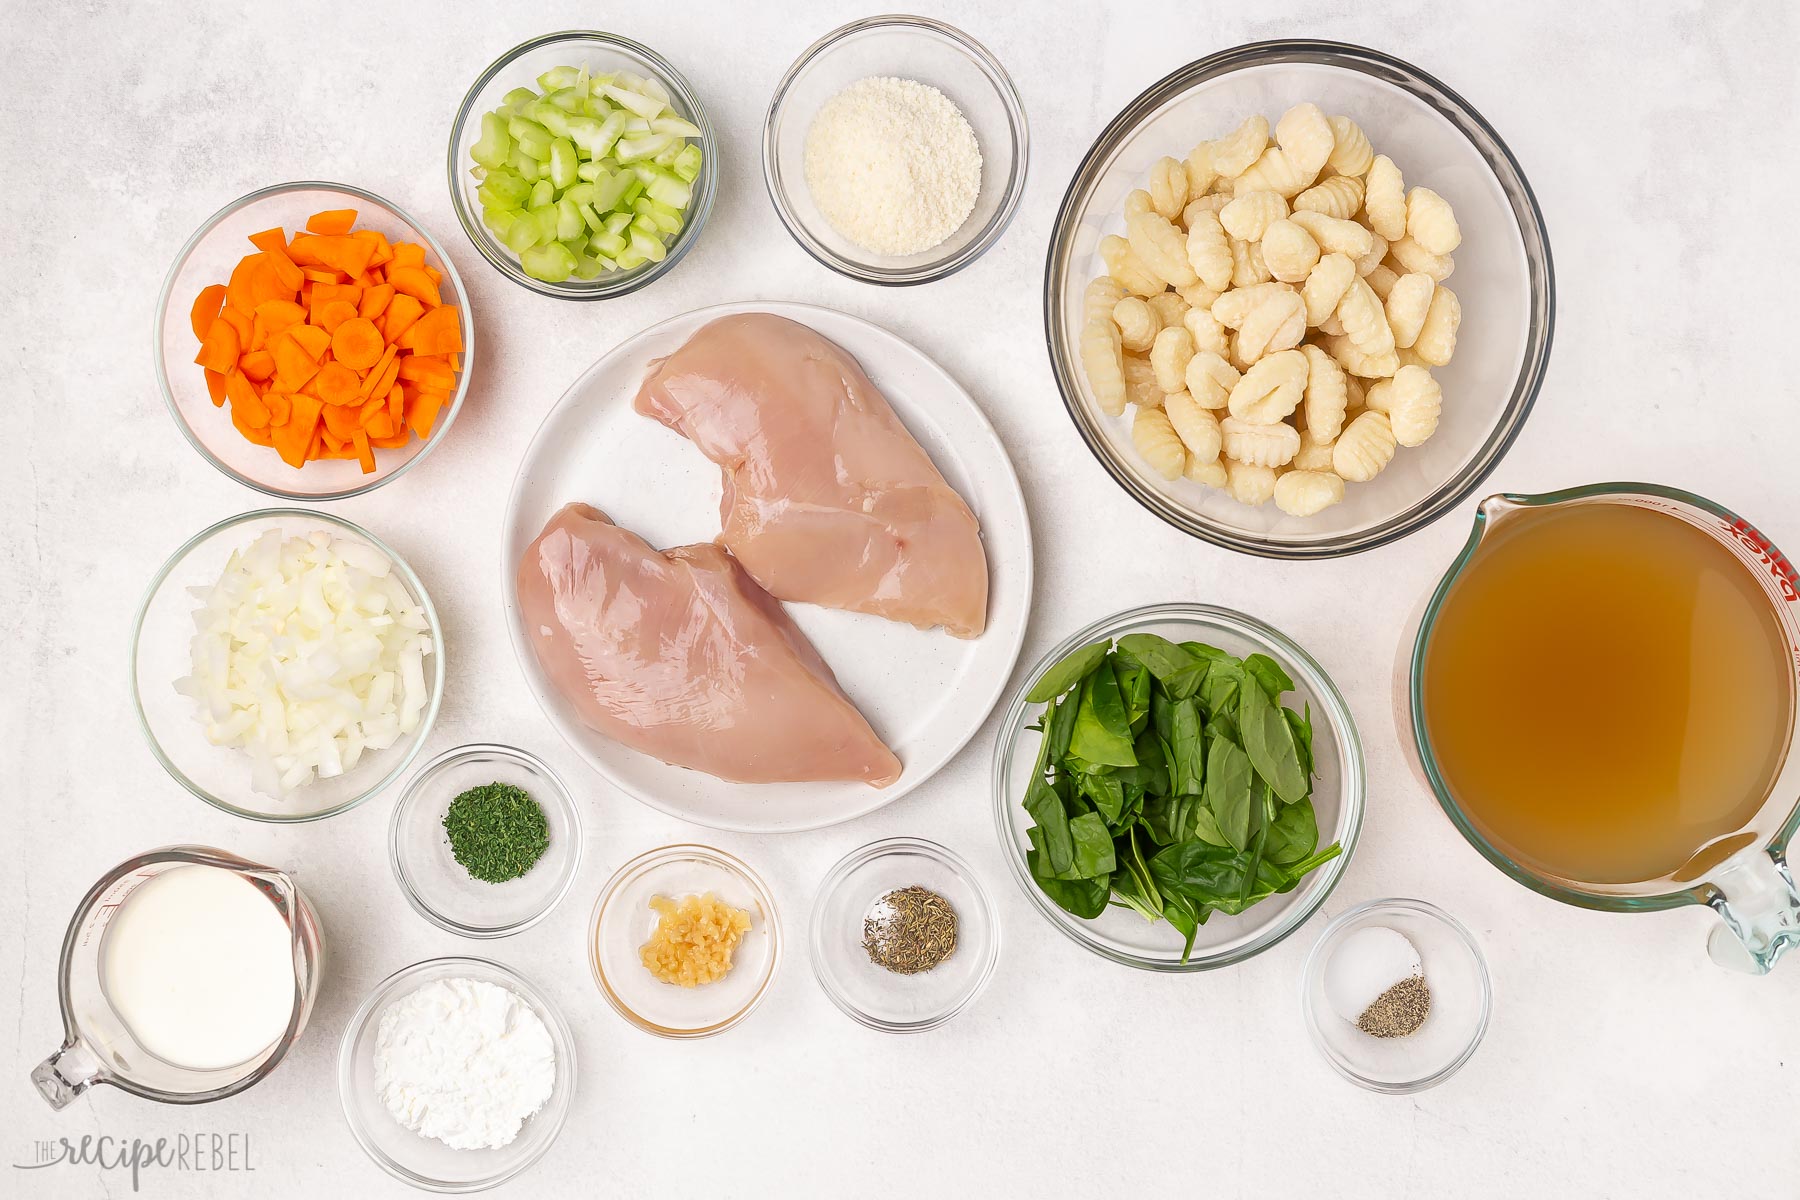 ingredients needed for slow cooker chicken gnocchi soup.